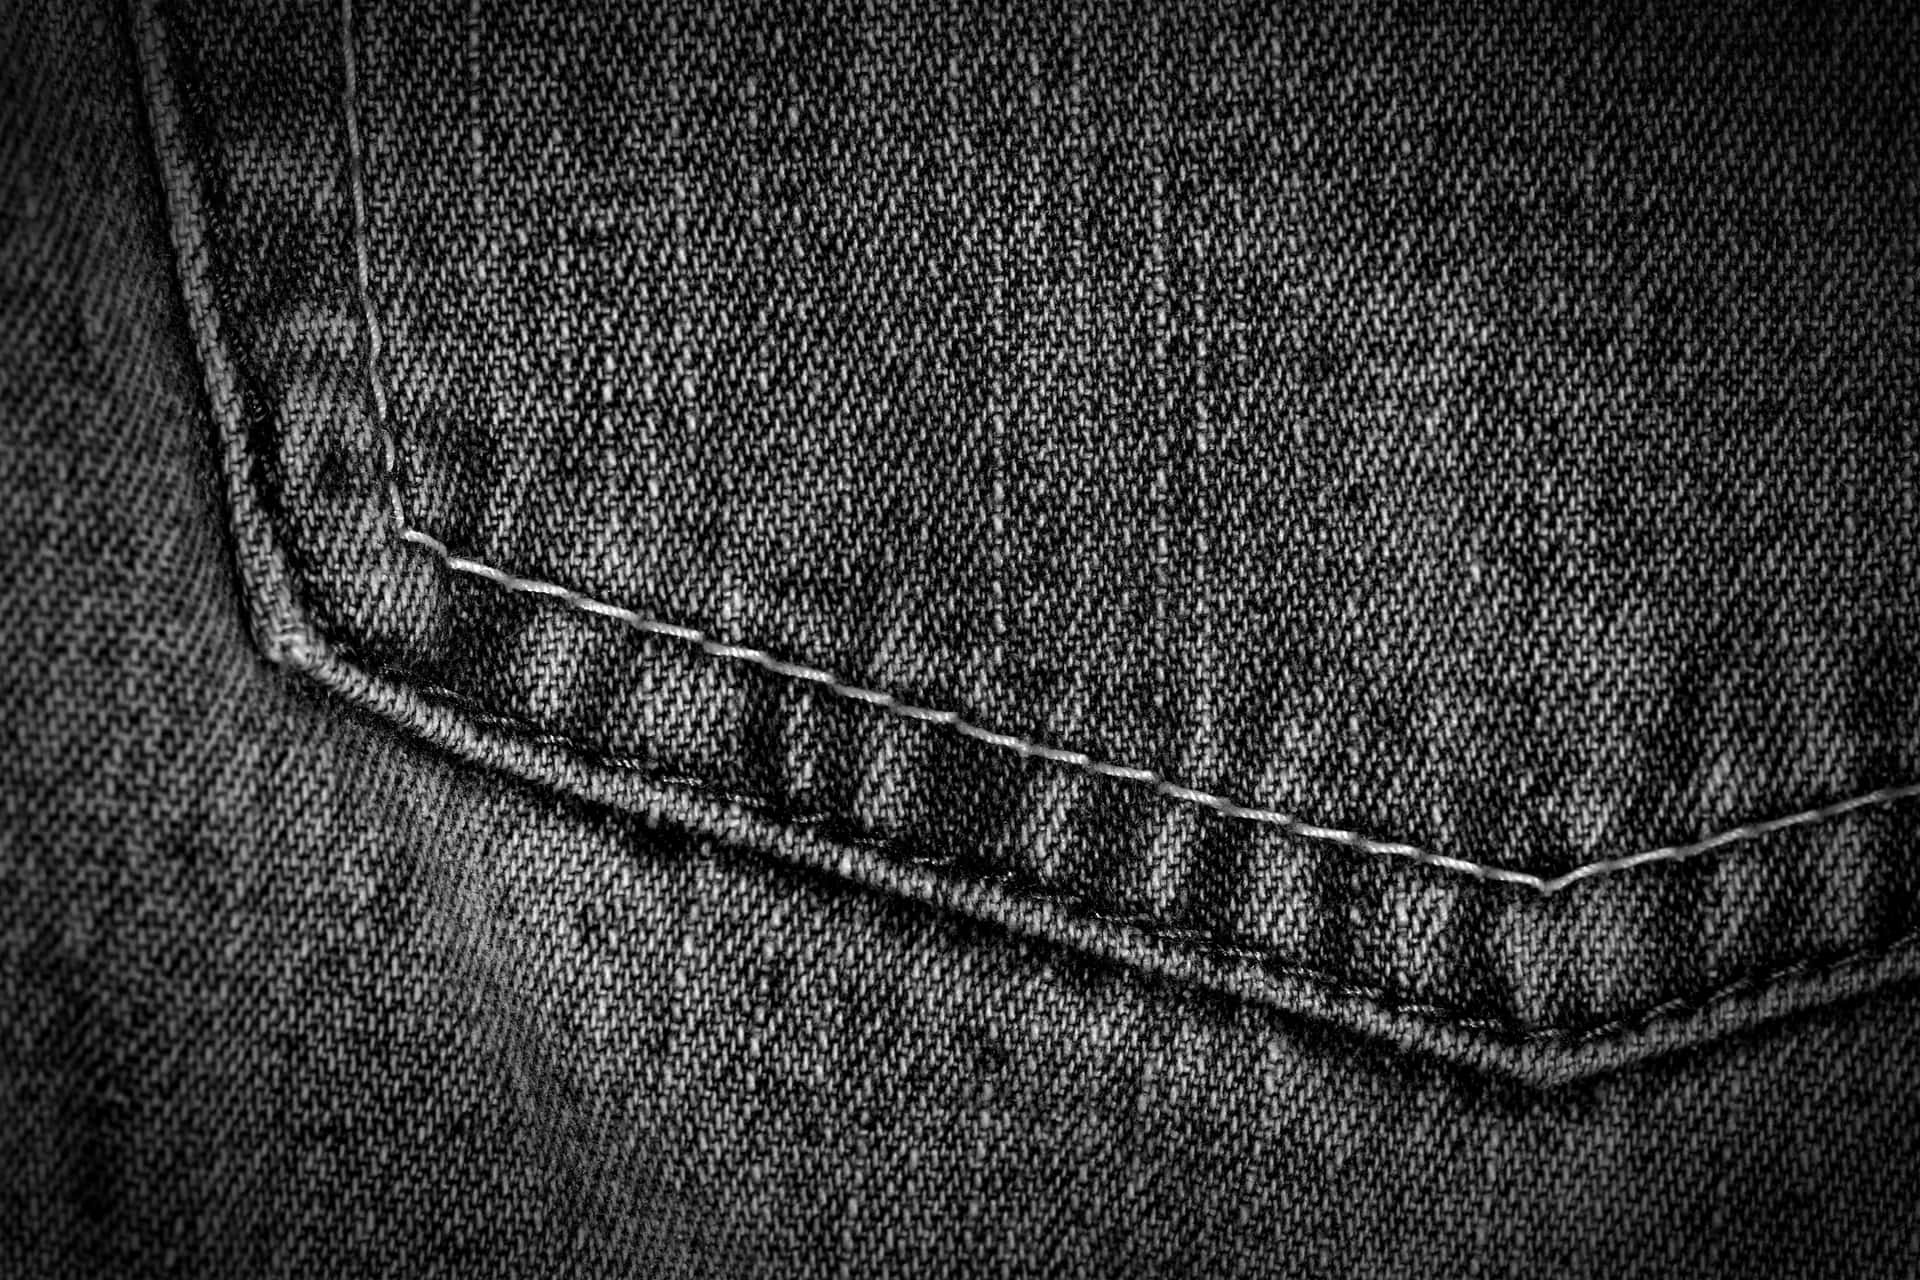 A Close Up Of A Pocket In A Pair Of Jeans